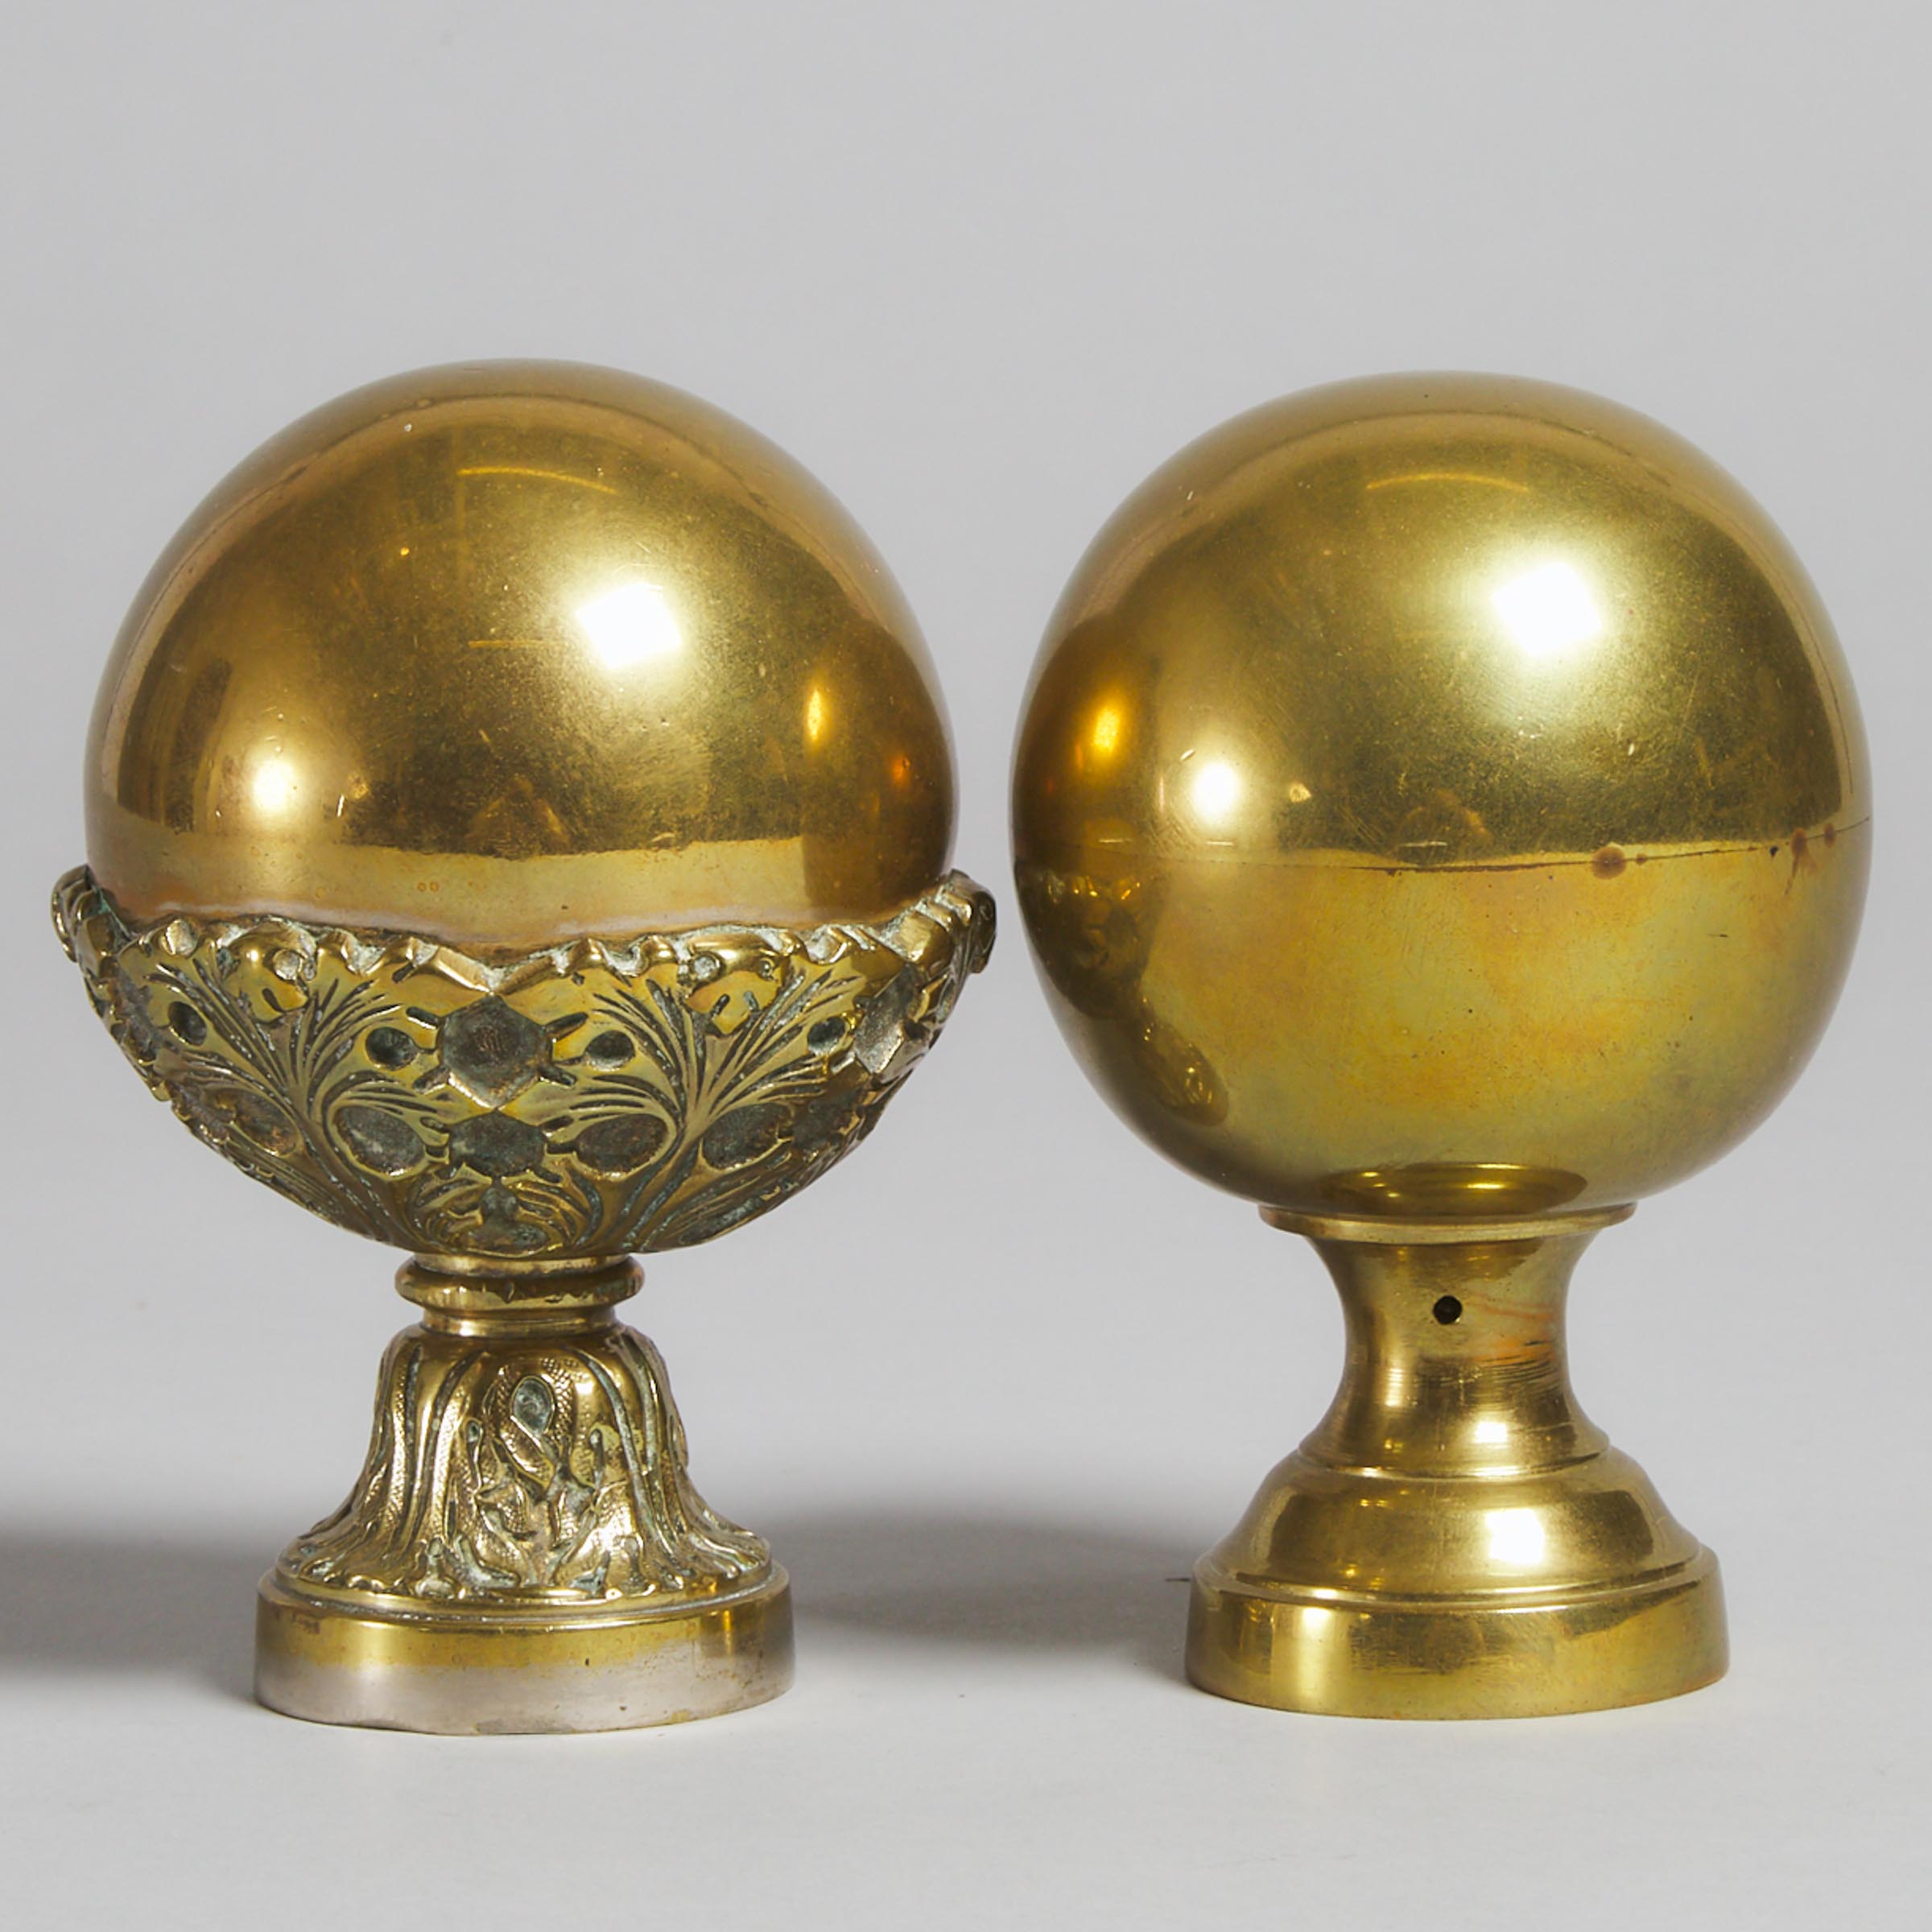 Two French Brass Newel Post Finials, 19th century